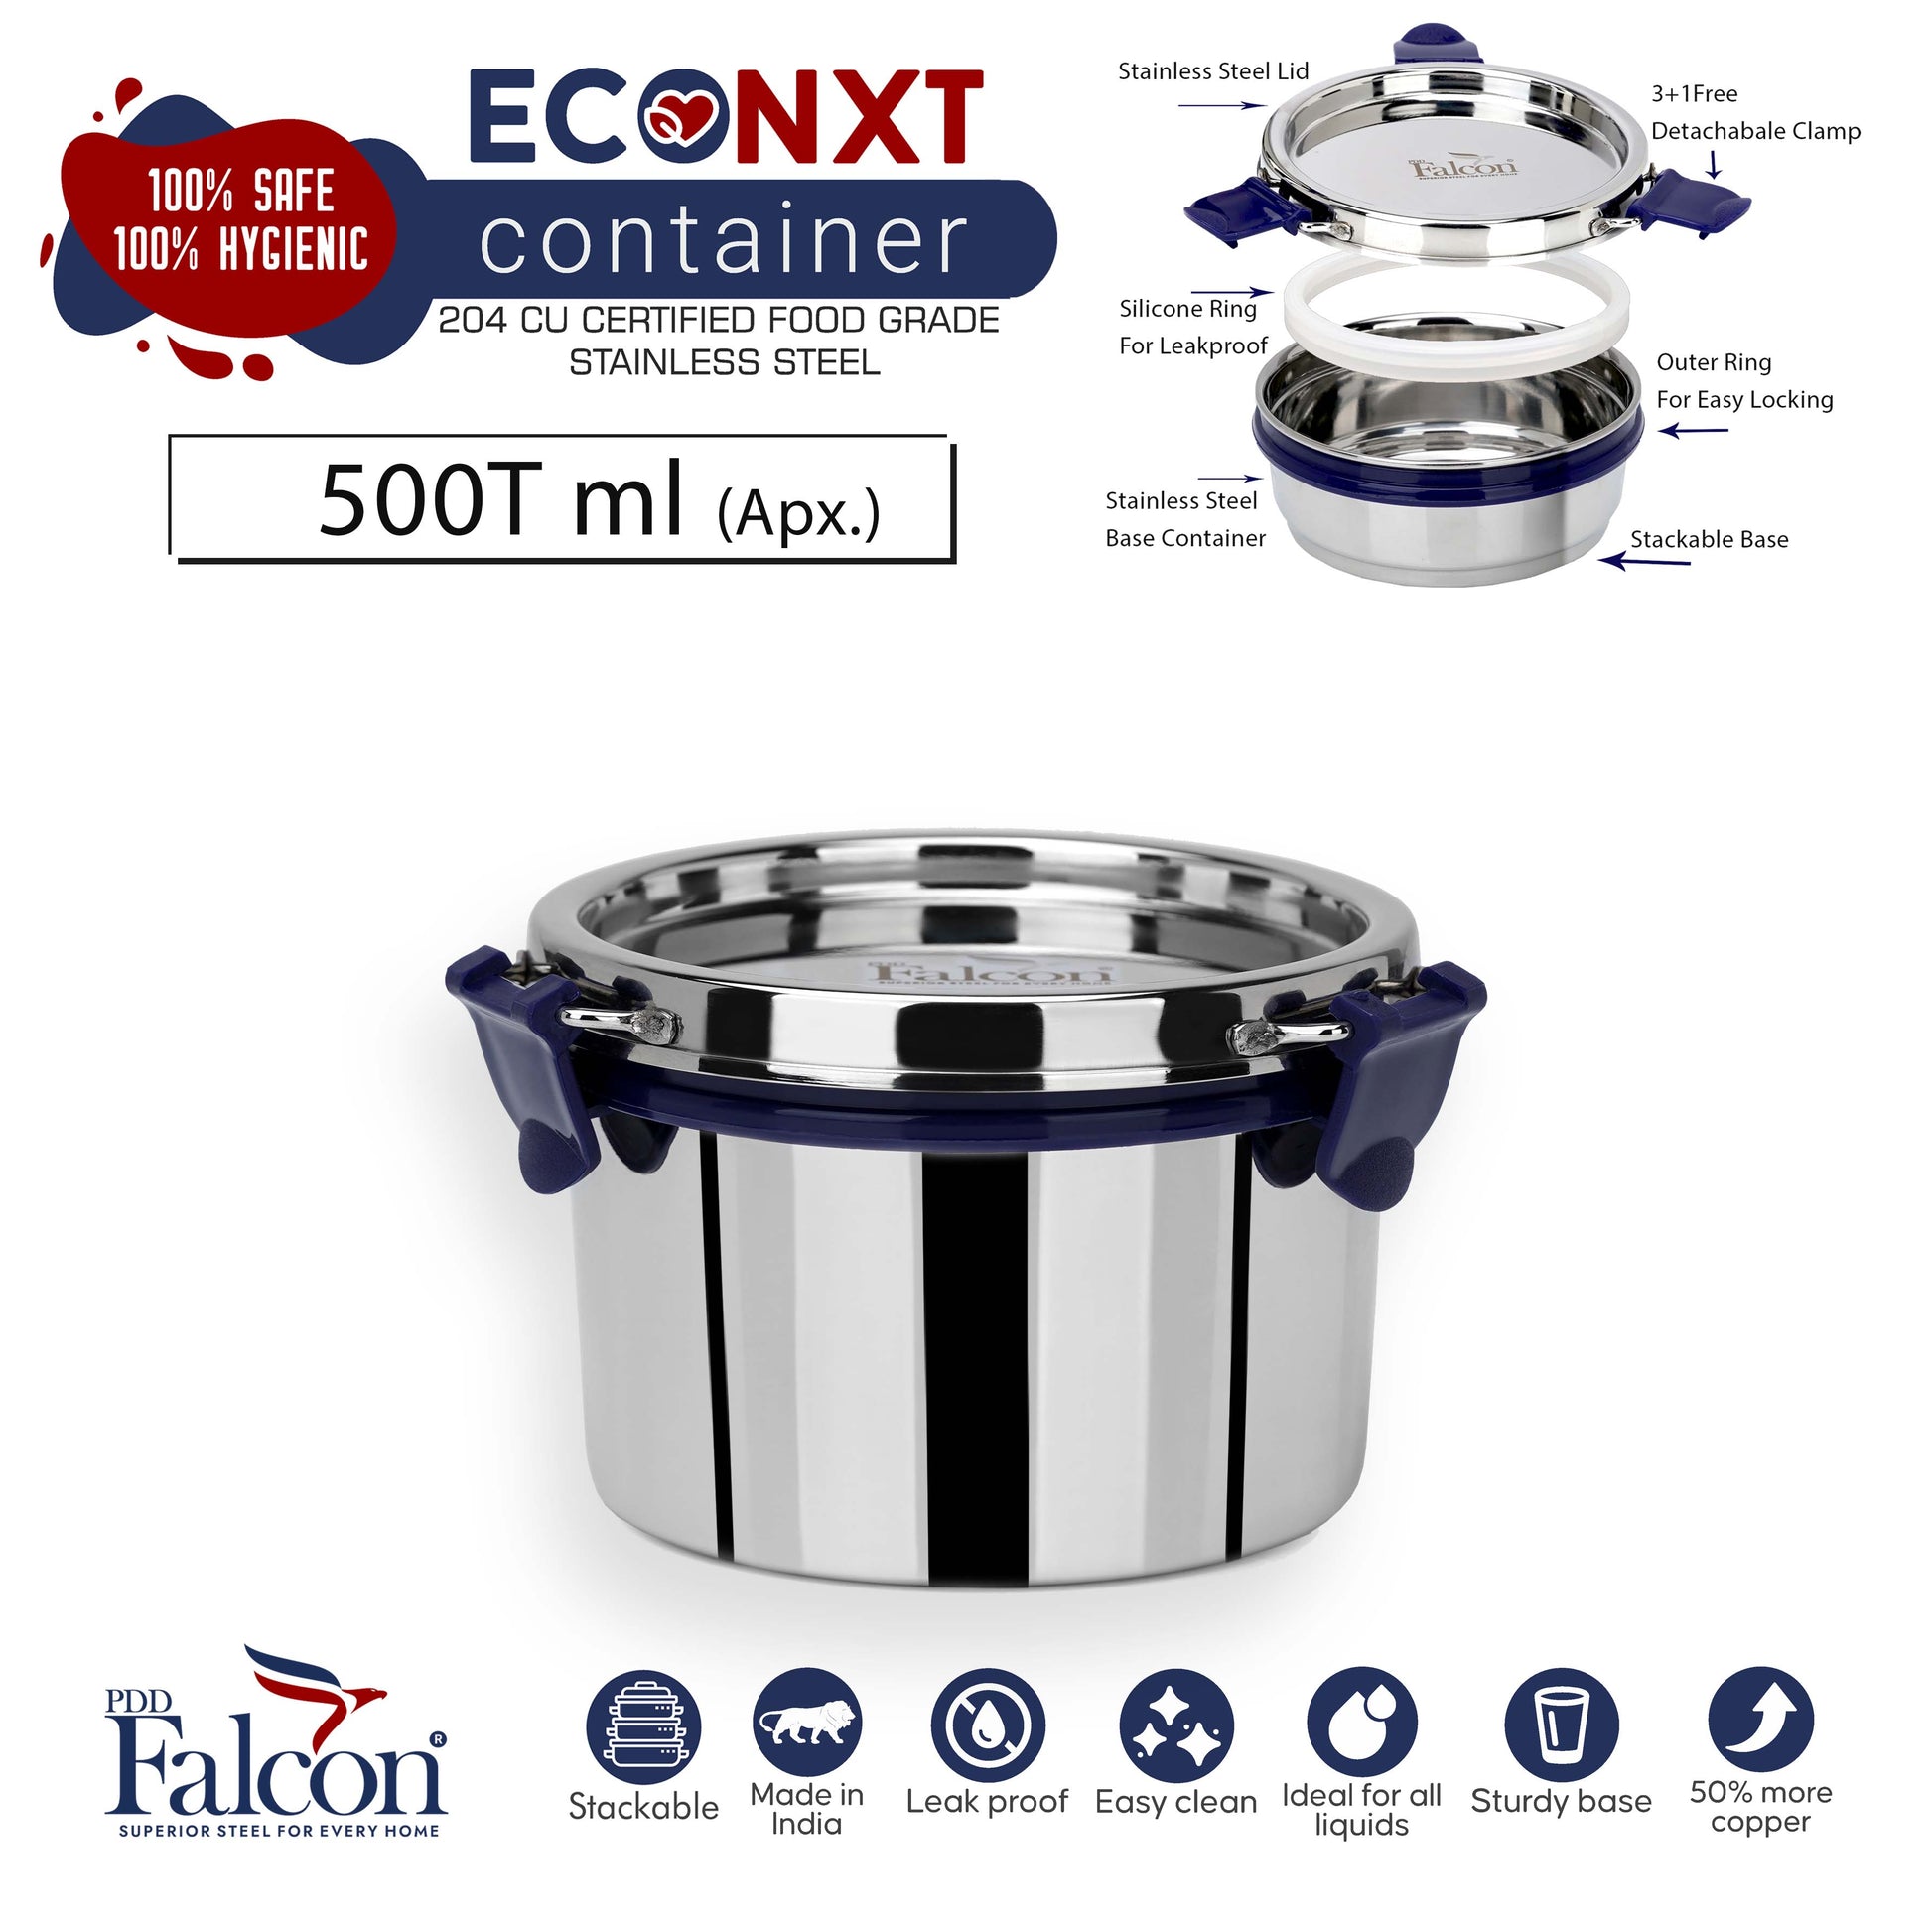 PddFalcon Stainless Steel Lunch Box EcoNxt Container 500mlT